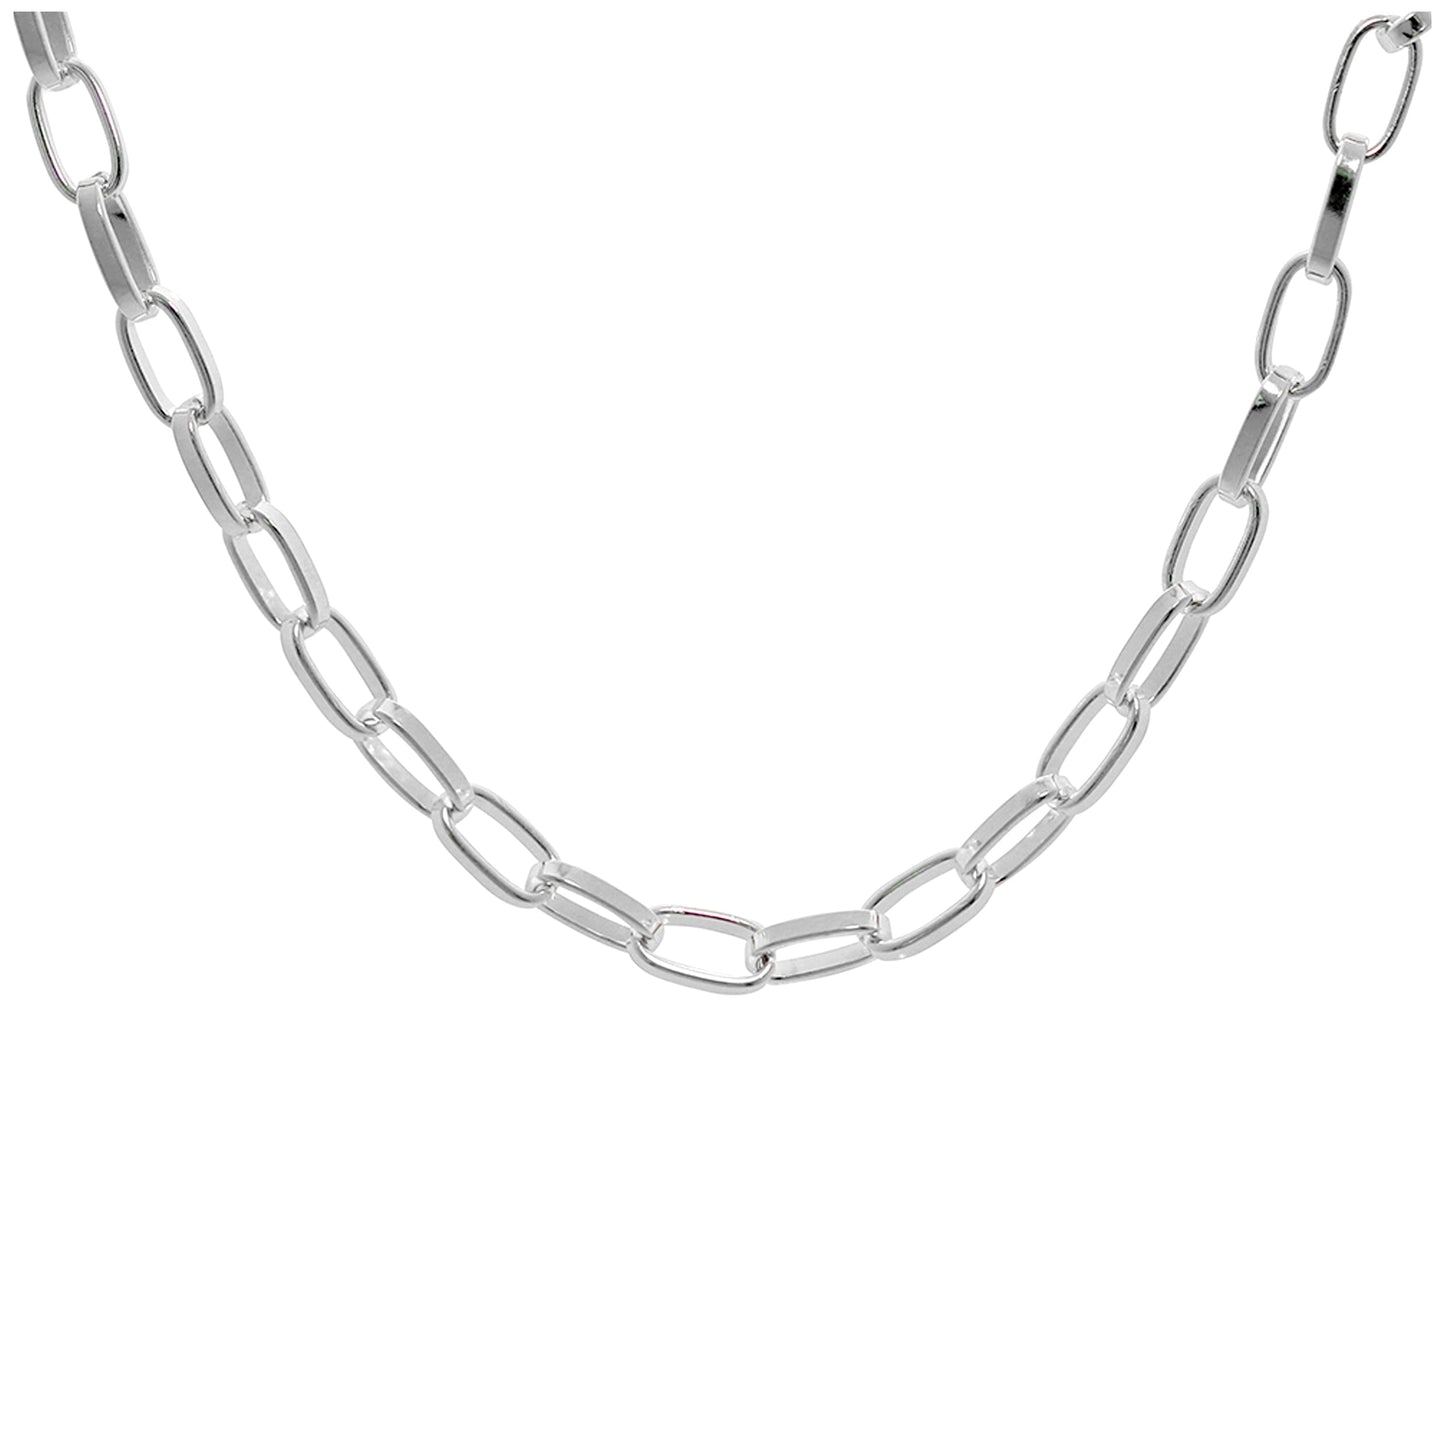 Sterling Silver Link Chain Adjustable Necklace 16 - 18 Inches